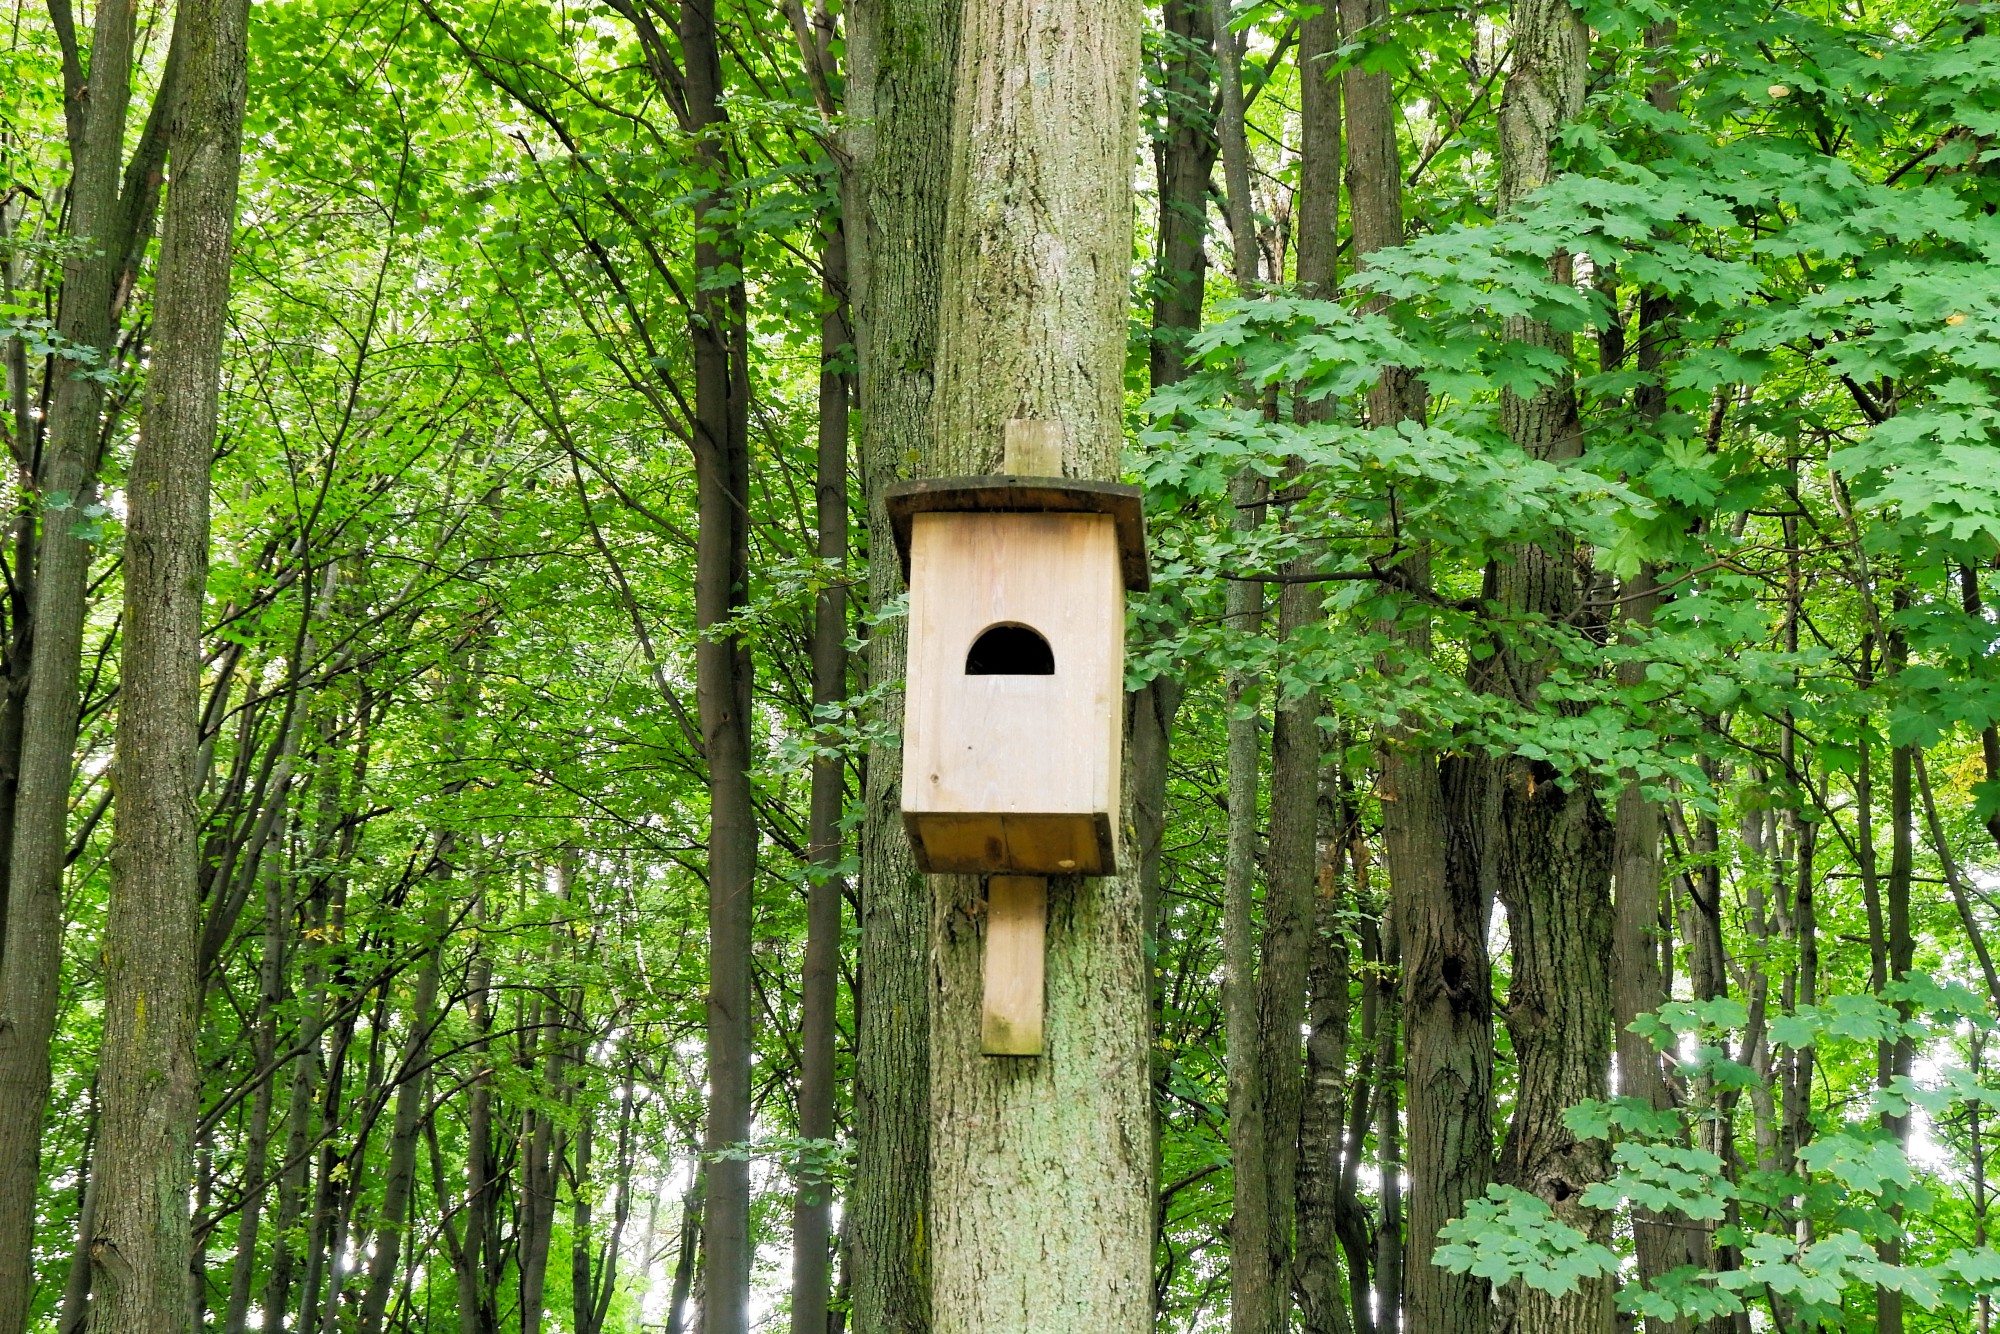 Image of a bird box against a tree